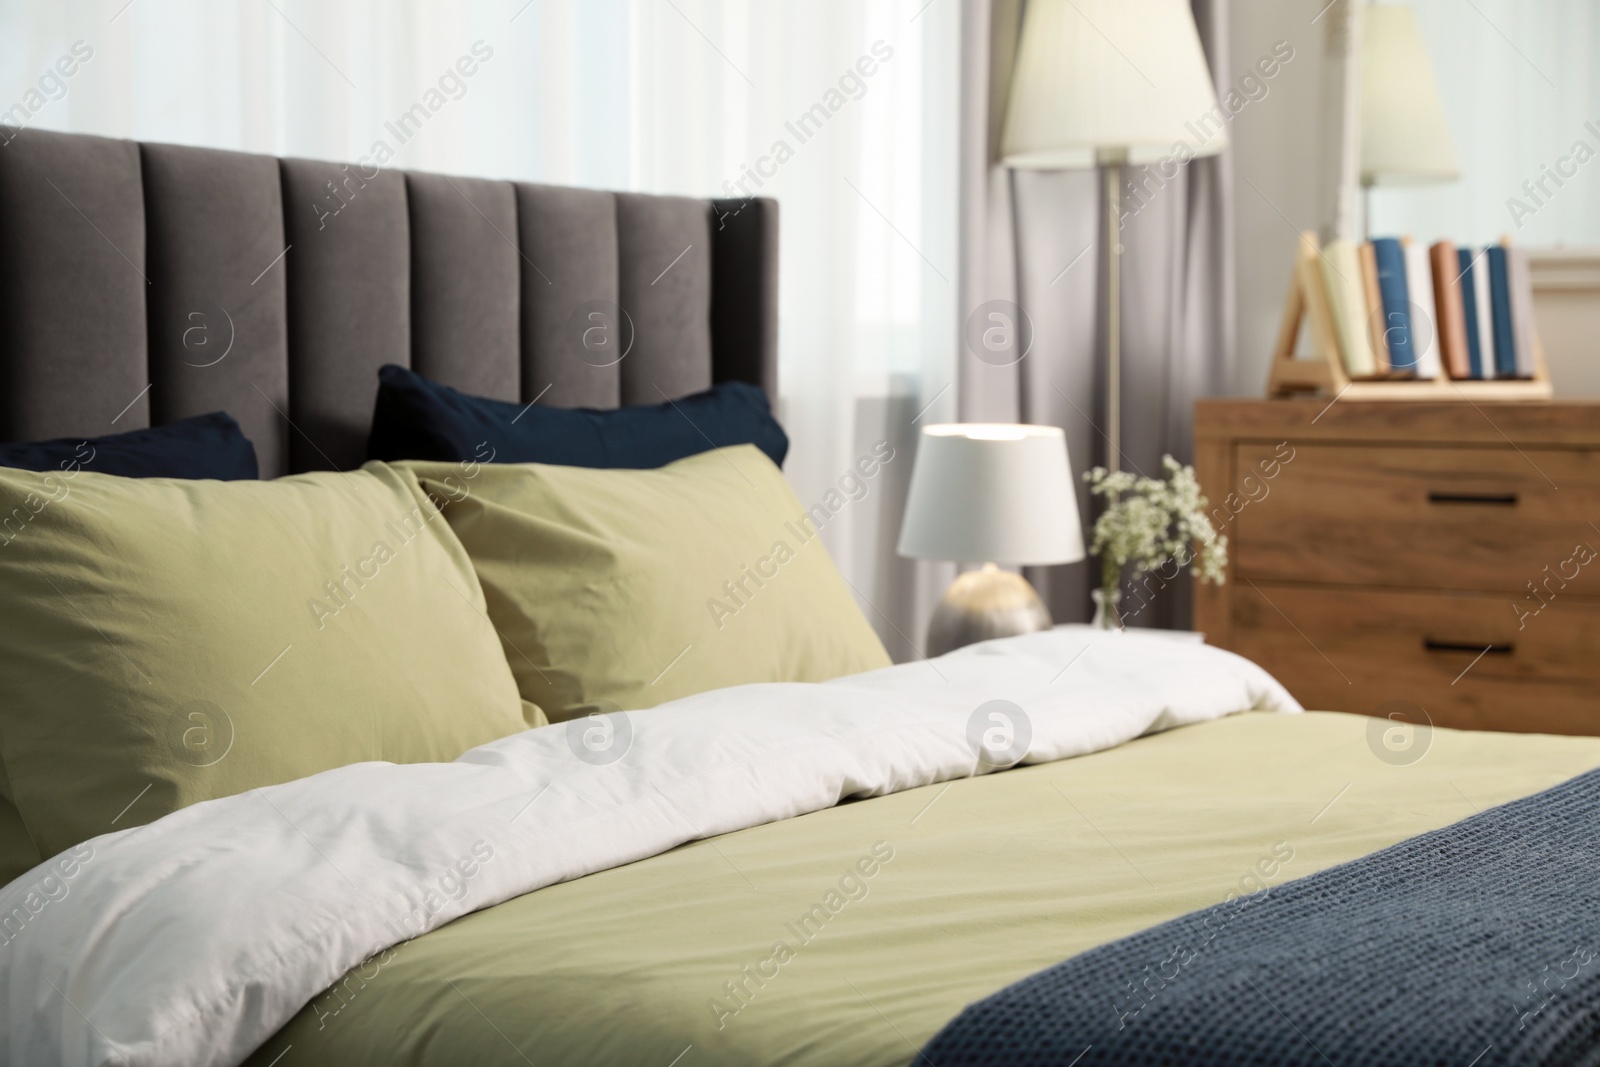 Photo of Comfortable bed with cushions and bedding in room. Stylish interior